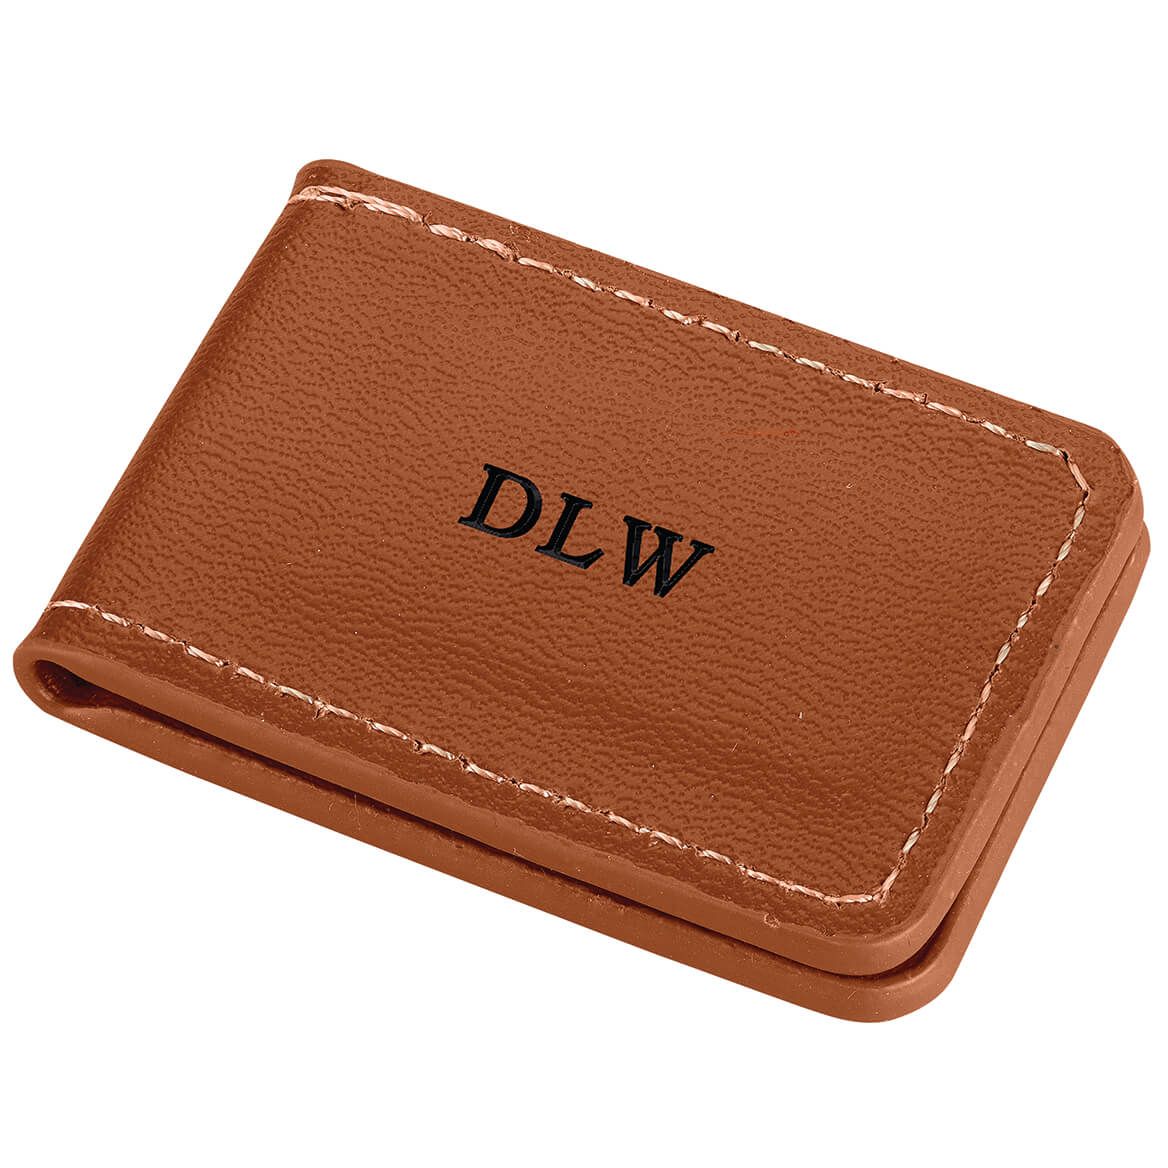 Pers Wide Leather Money Clip + '-' + 327399